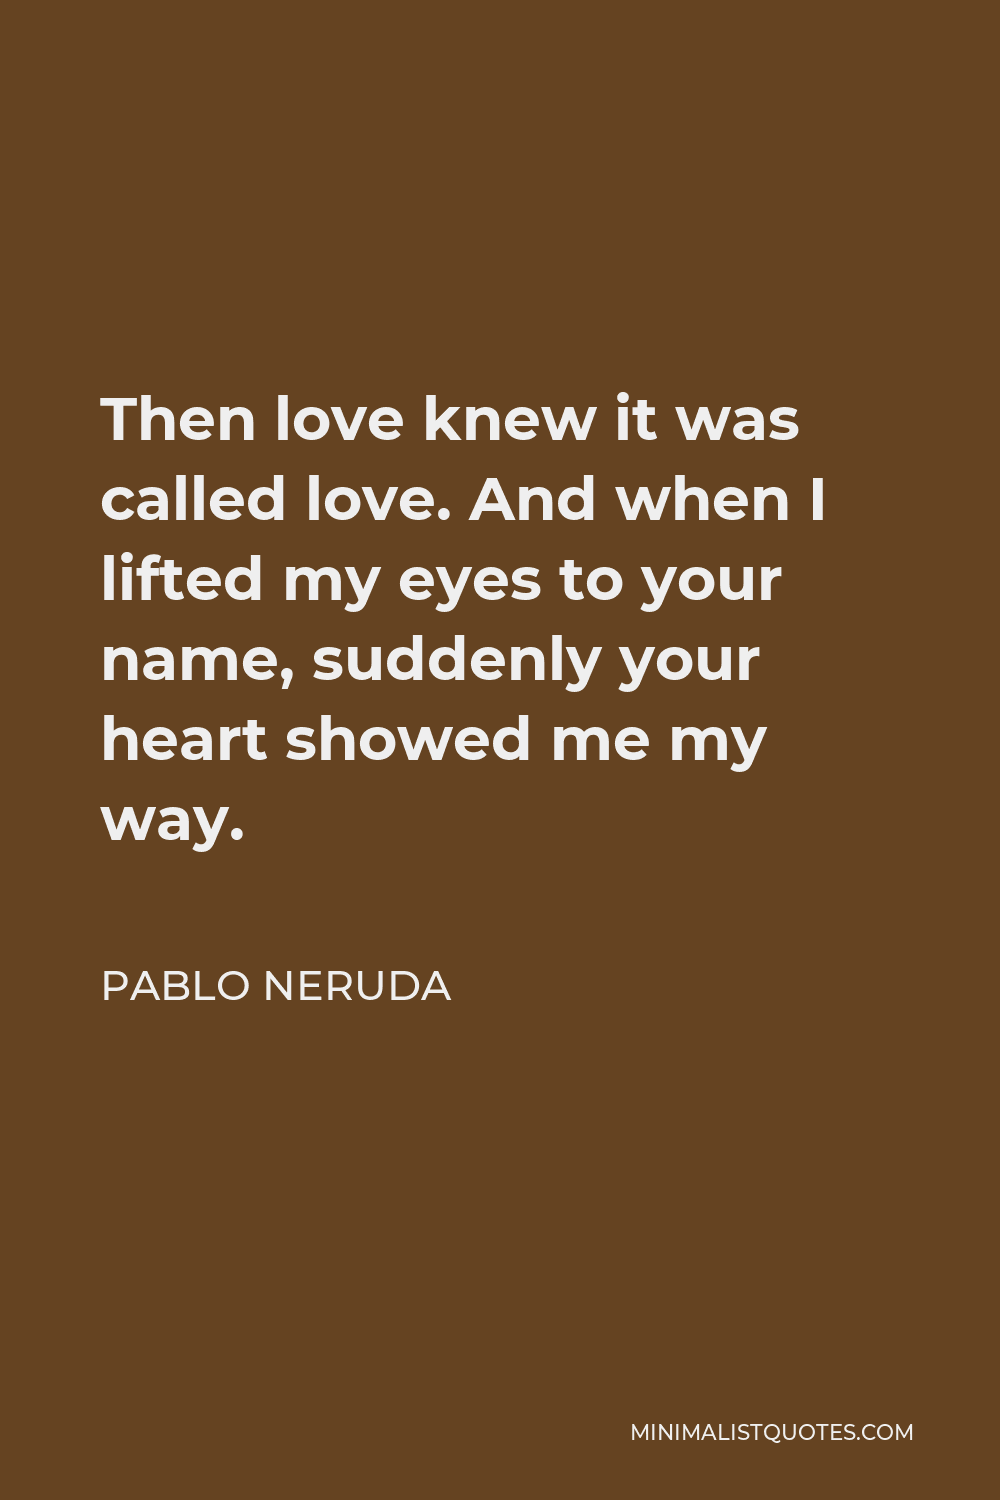 Pablo Neruda Quote - Then love knew it was called love. And when I lifted my eyes to your name, suddenly your heart showed me my way.